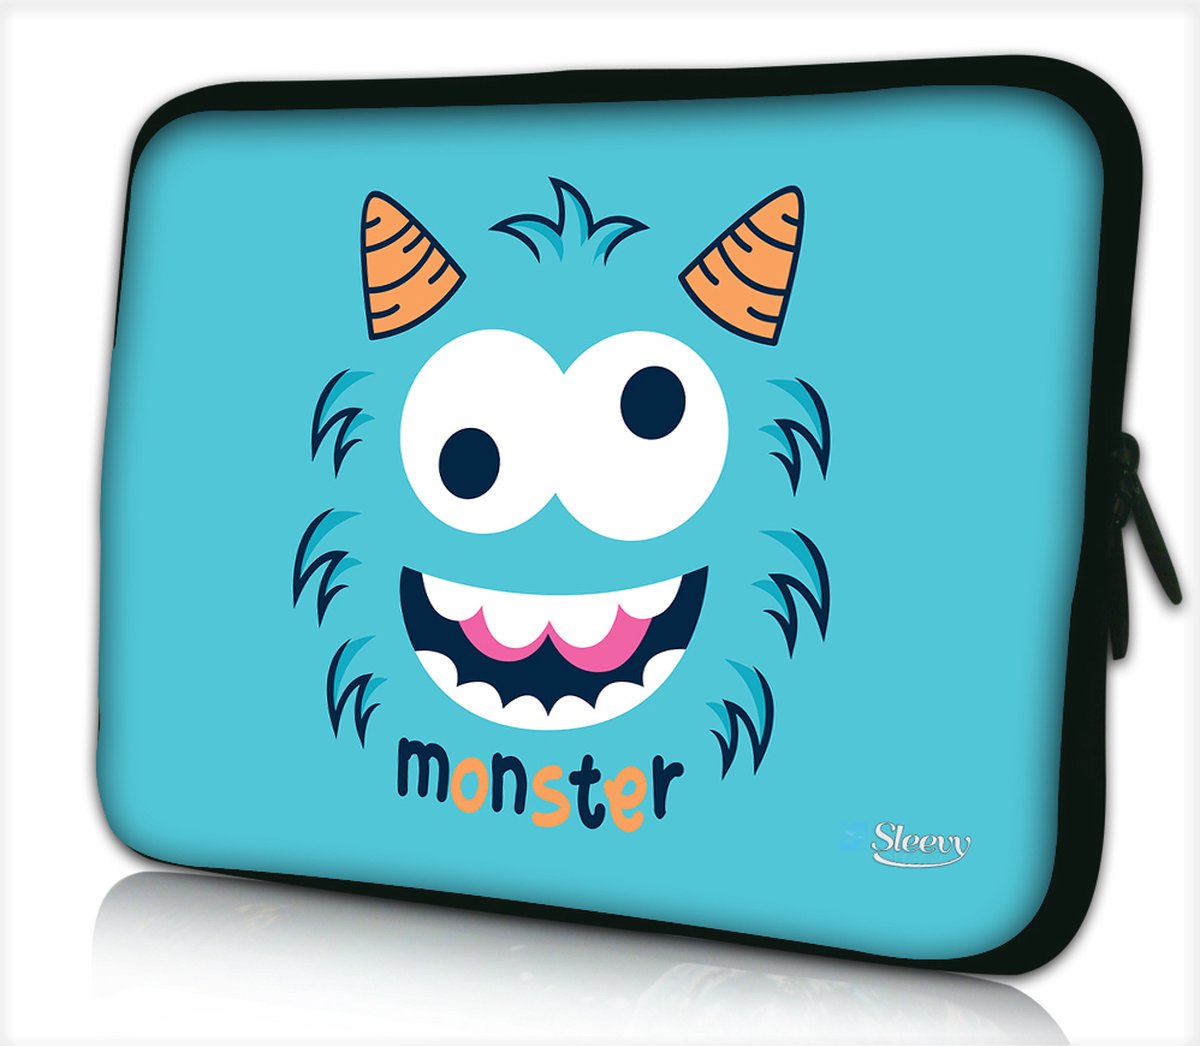 Laptophoes 13,3 inch monster - Sleevy - laptop sleeve - laptopcover - Alle inch-maten & keuze uit 250+ designs! Sleevy